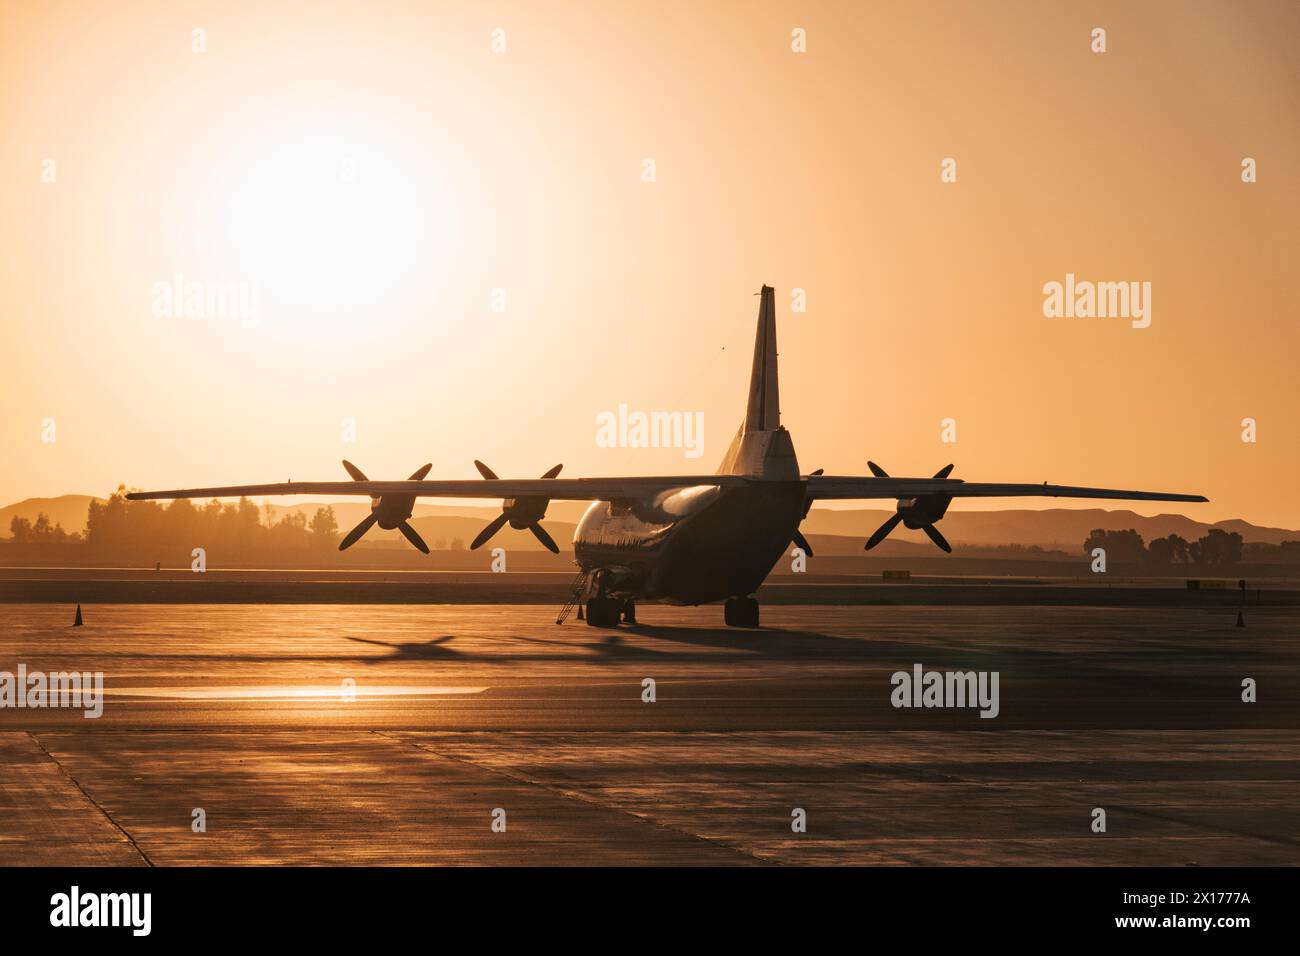 a Ukranian Antonov An-12 cargo plane of Motor Sich Airlines parked at Luxor Airport, Egypt, silhouetted against the morning sun Stock Photo